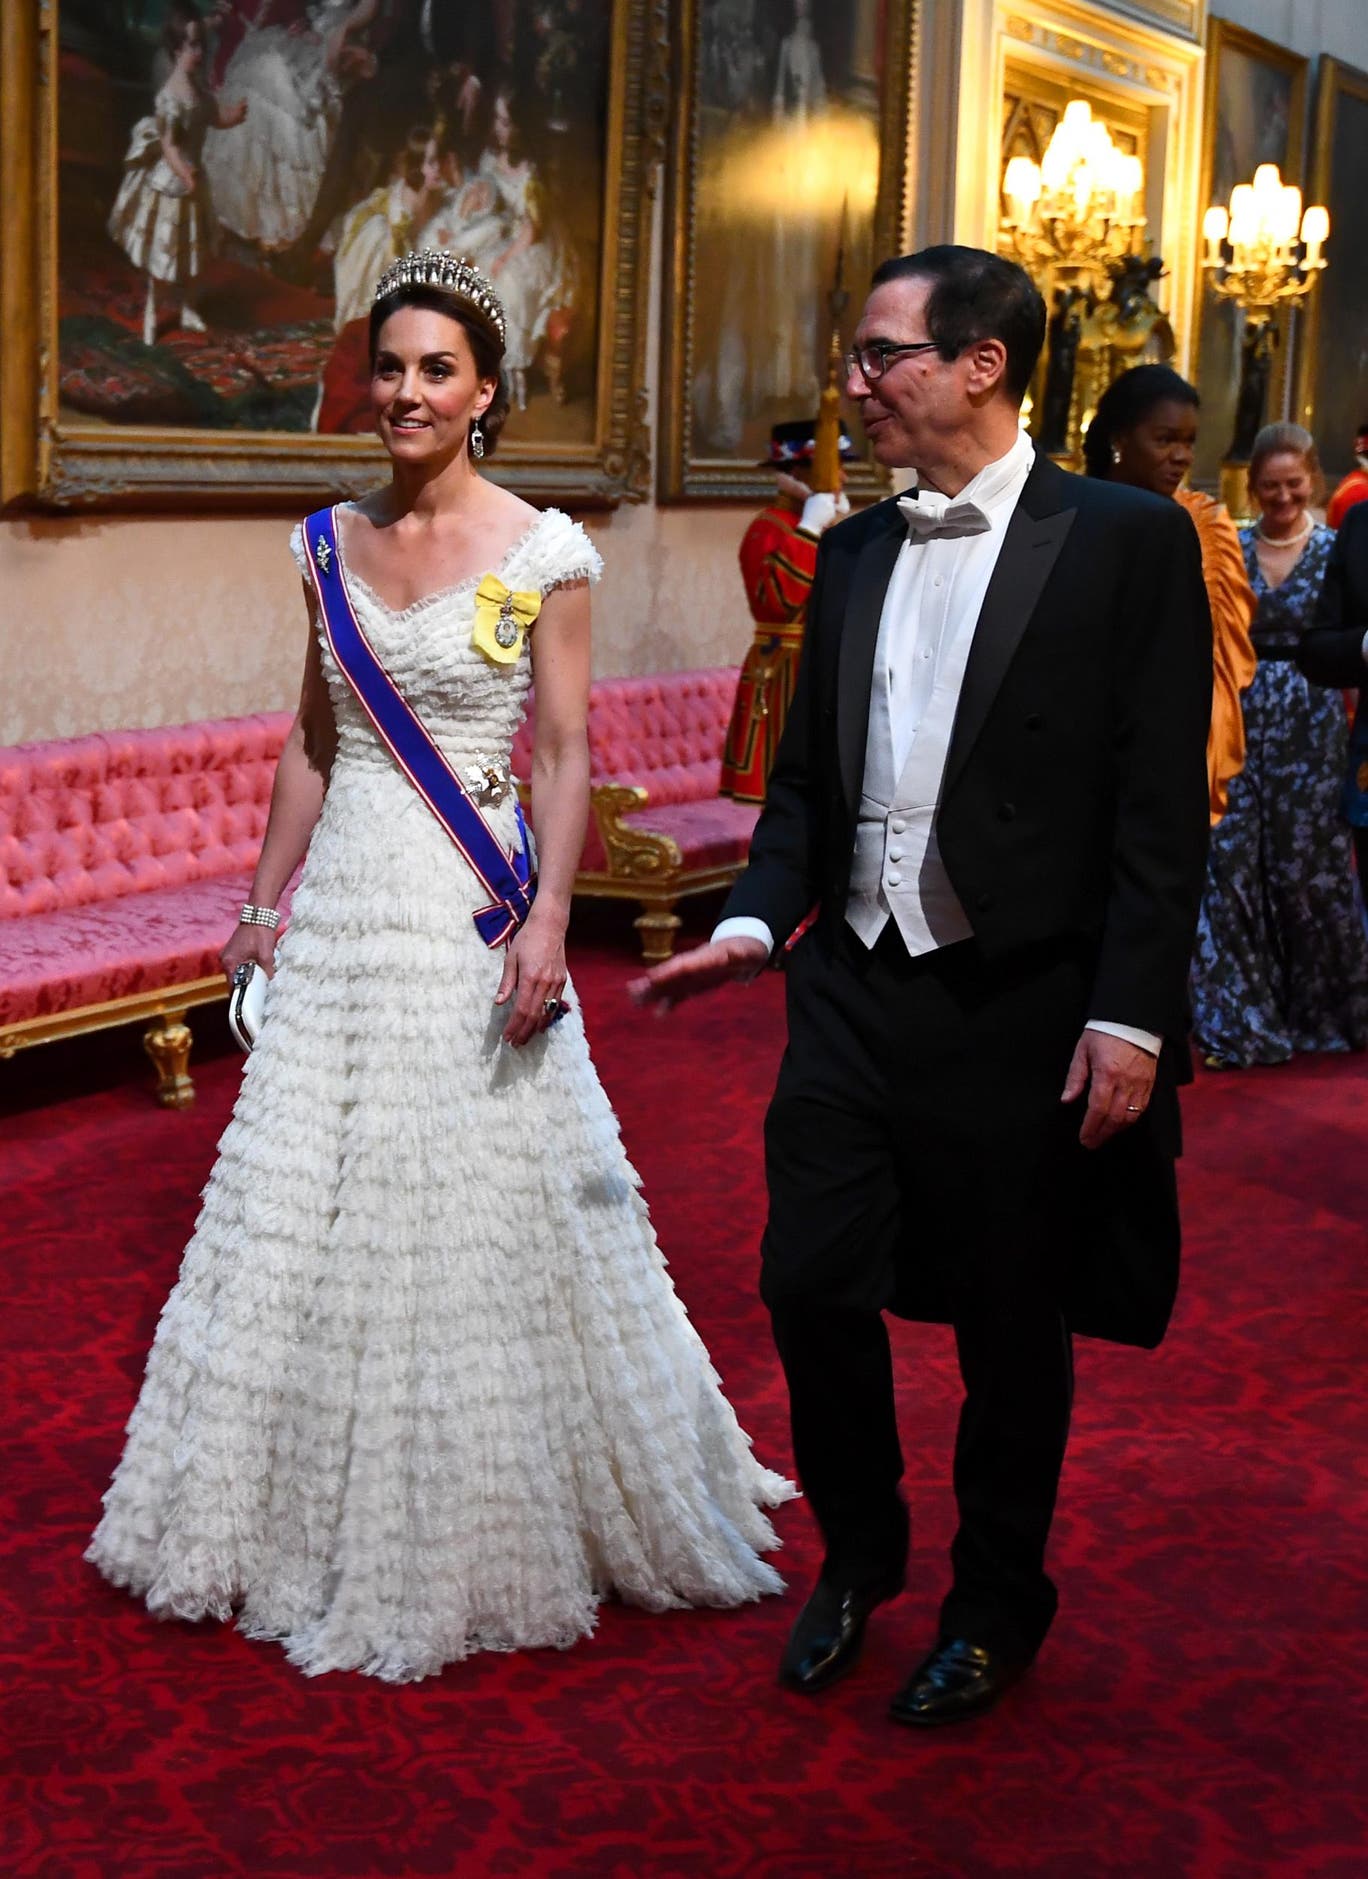 Kate wore a ruffled white gown